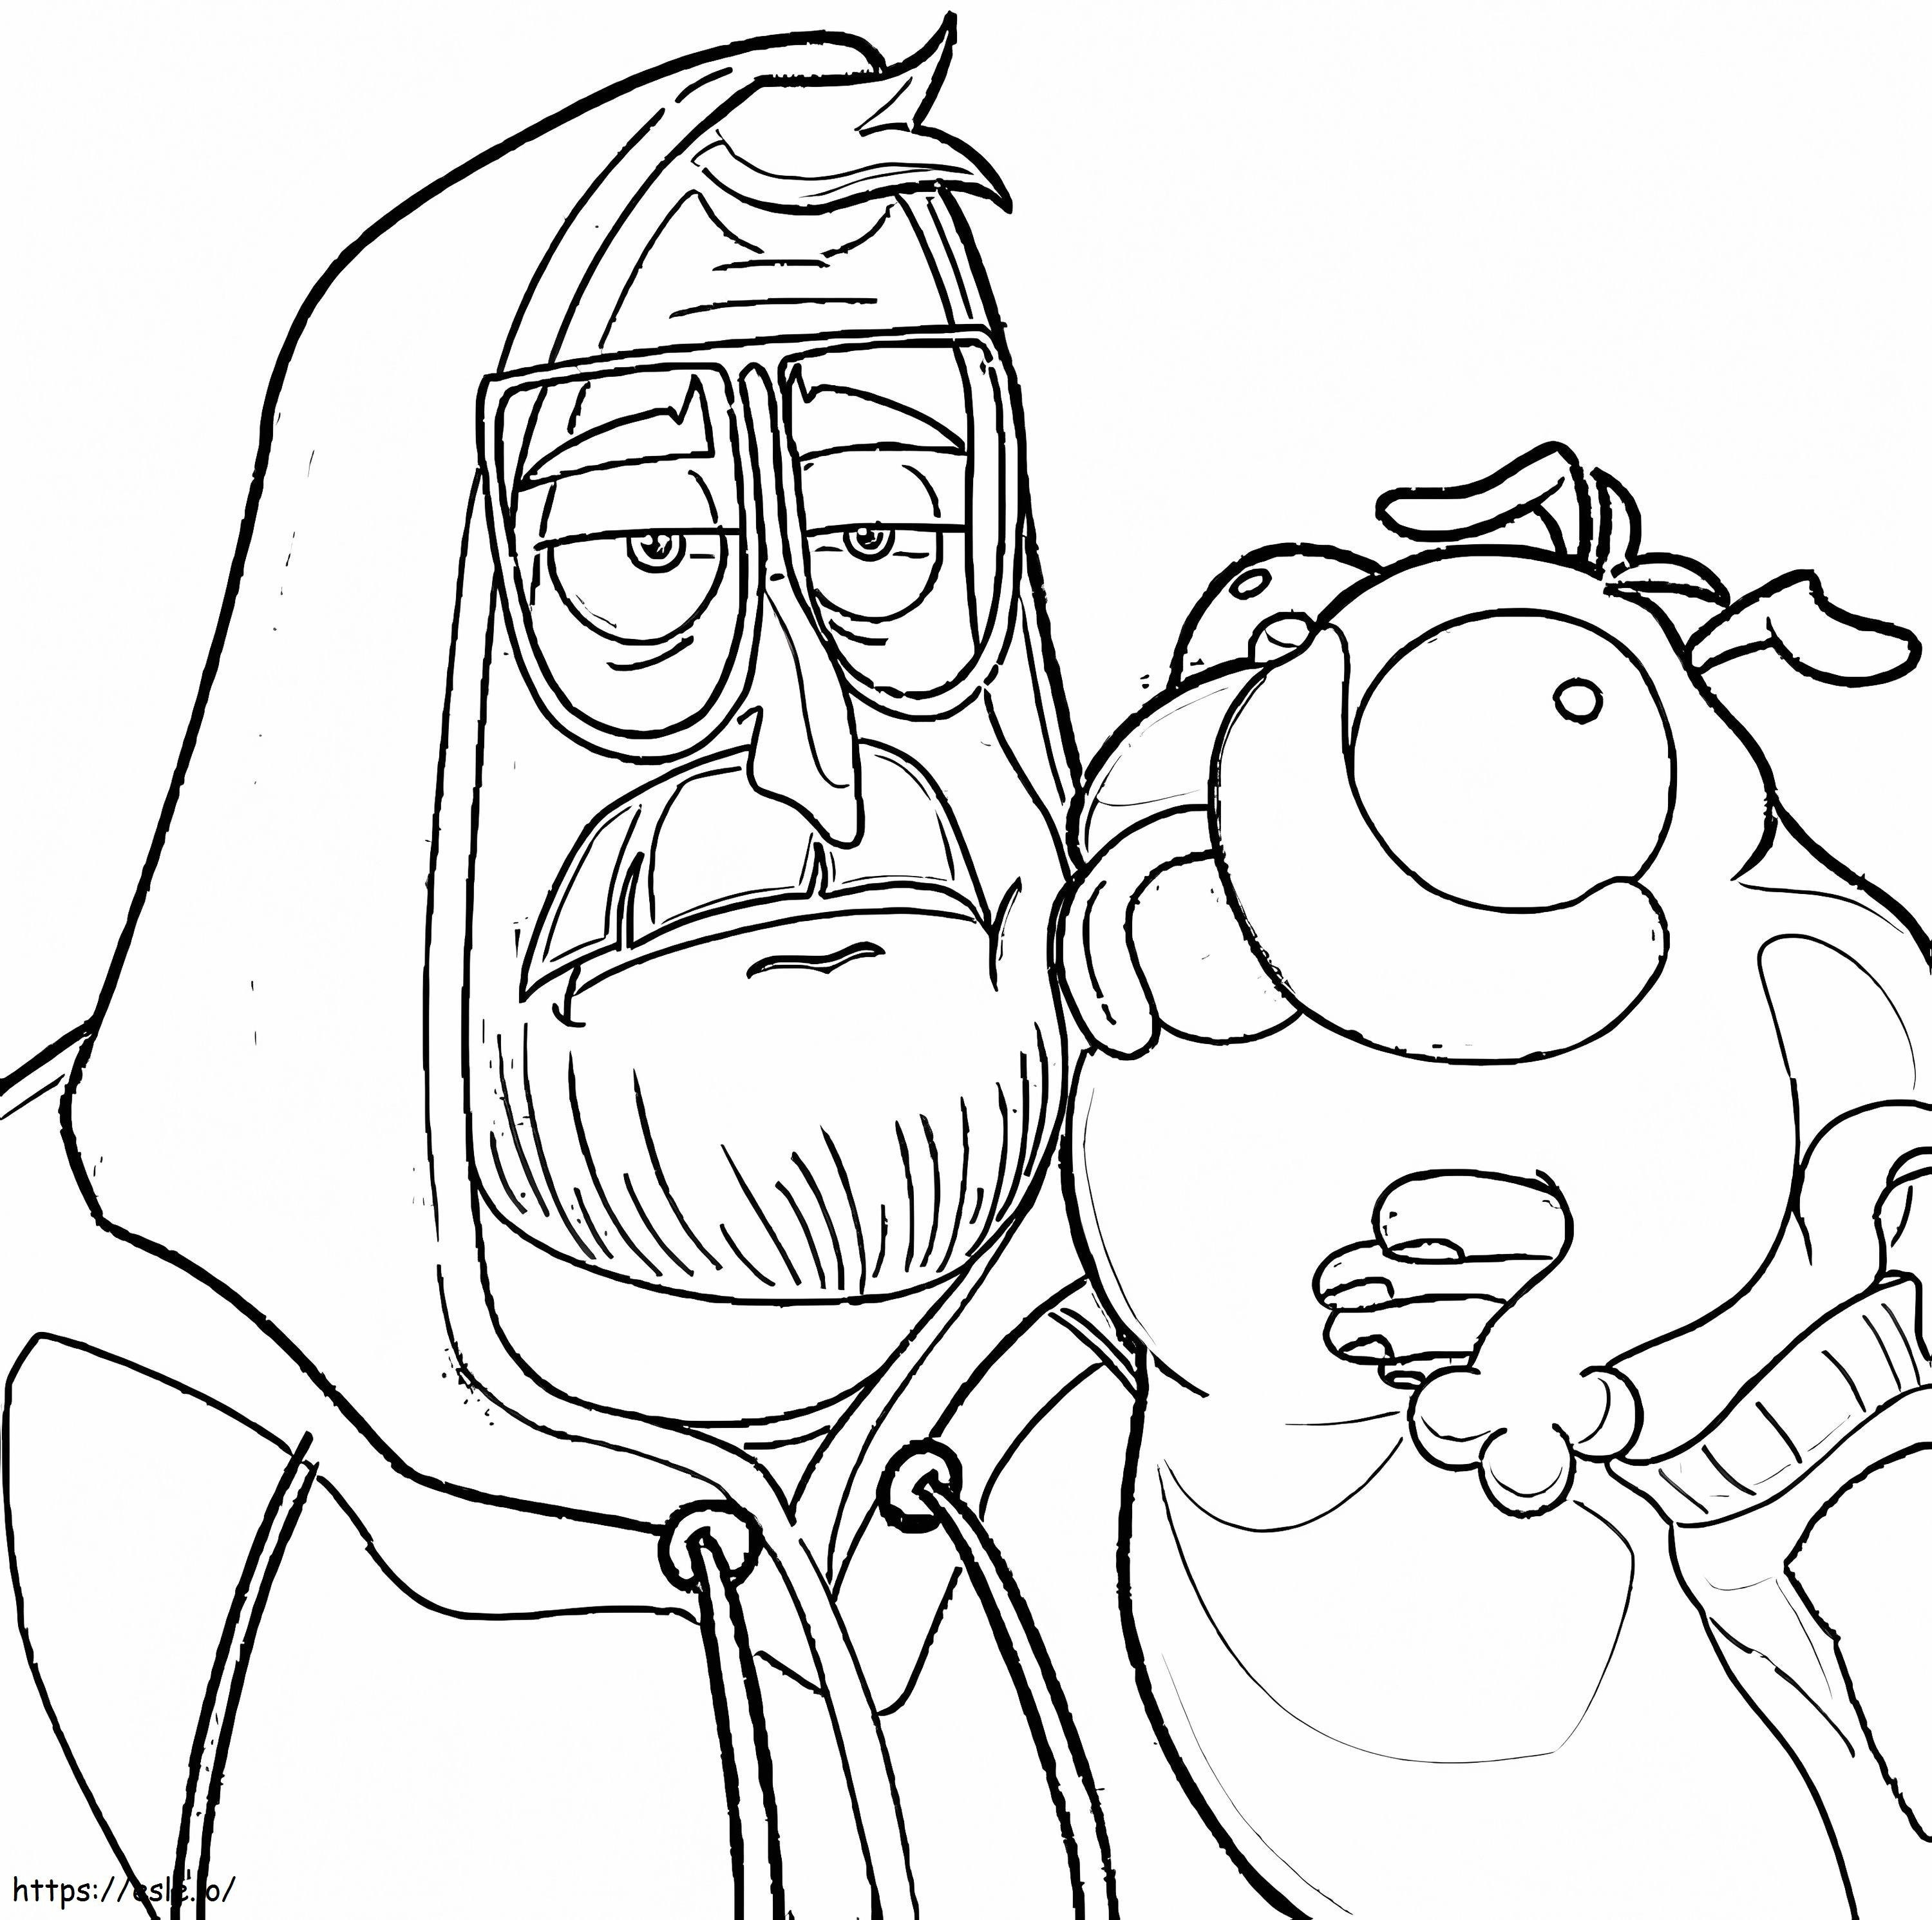 Rick And Monchi coloring page